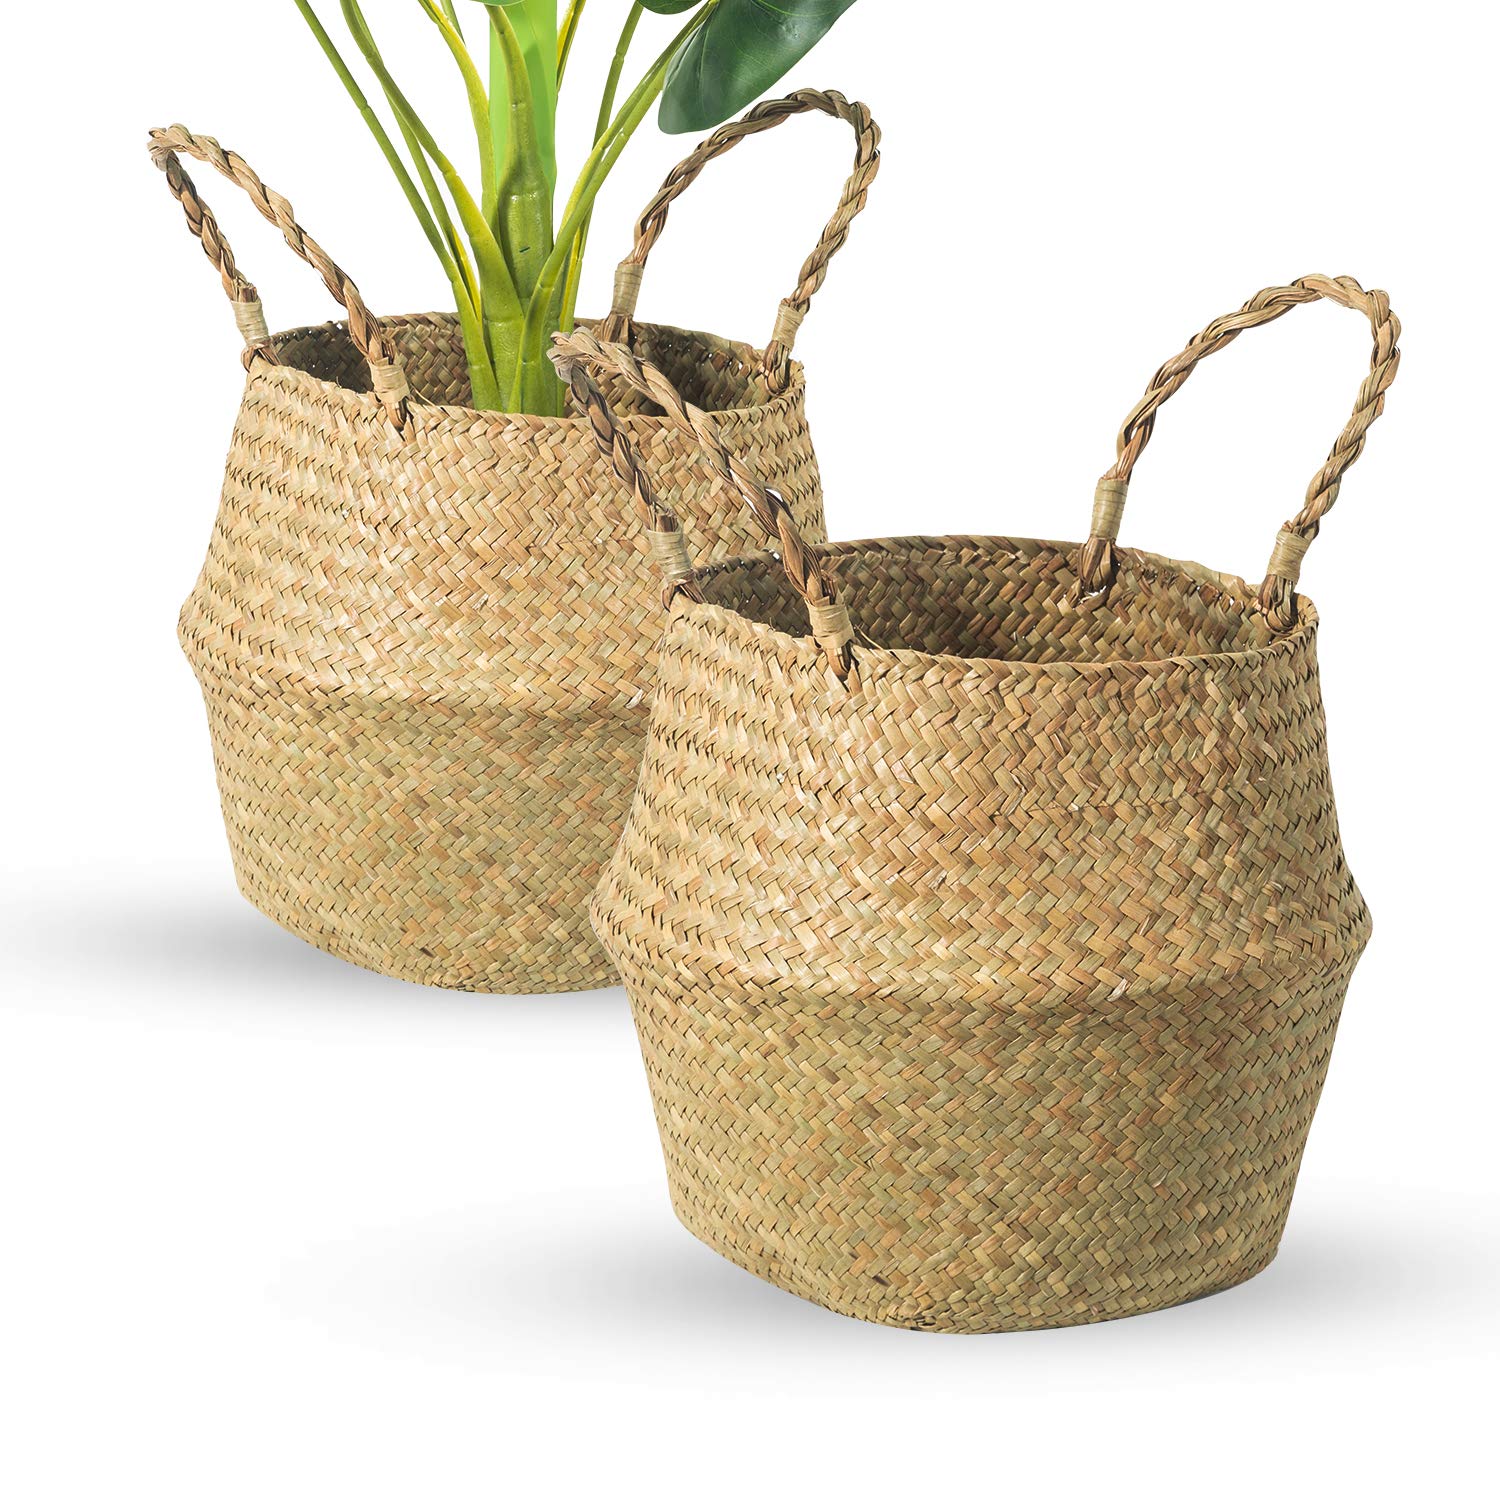 TKM Home Seagrass Belly Basket, Set Of 2 Woven Plant Pot Holder Handmade Home Decor For Storage Plants Picnic Grocery Medium(?